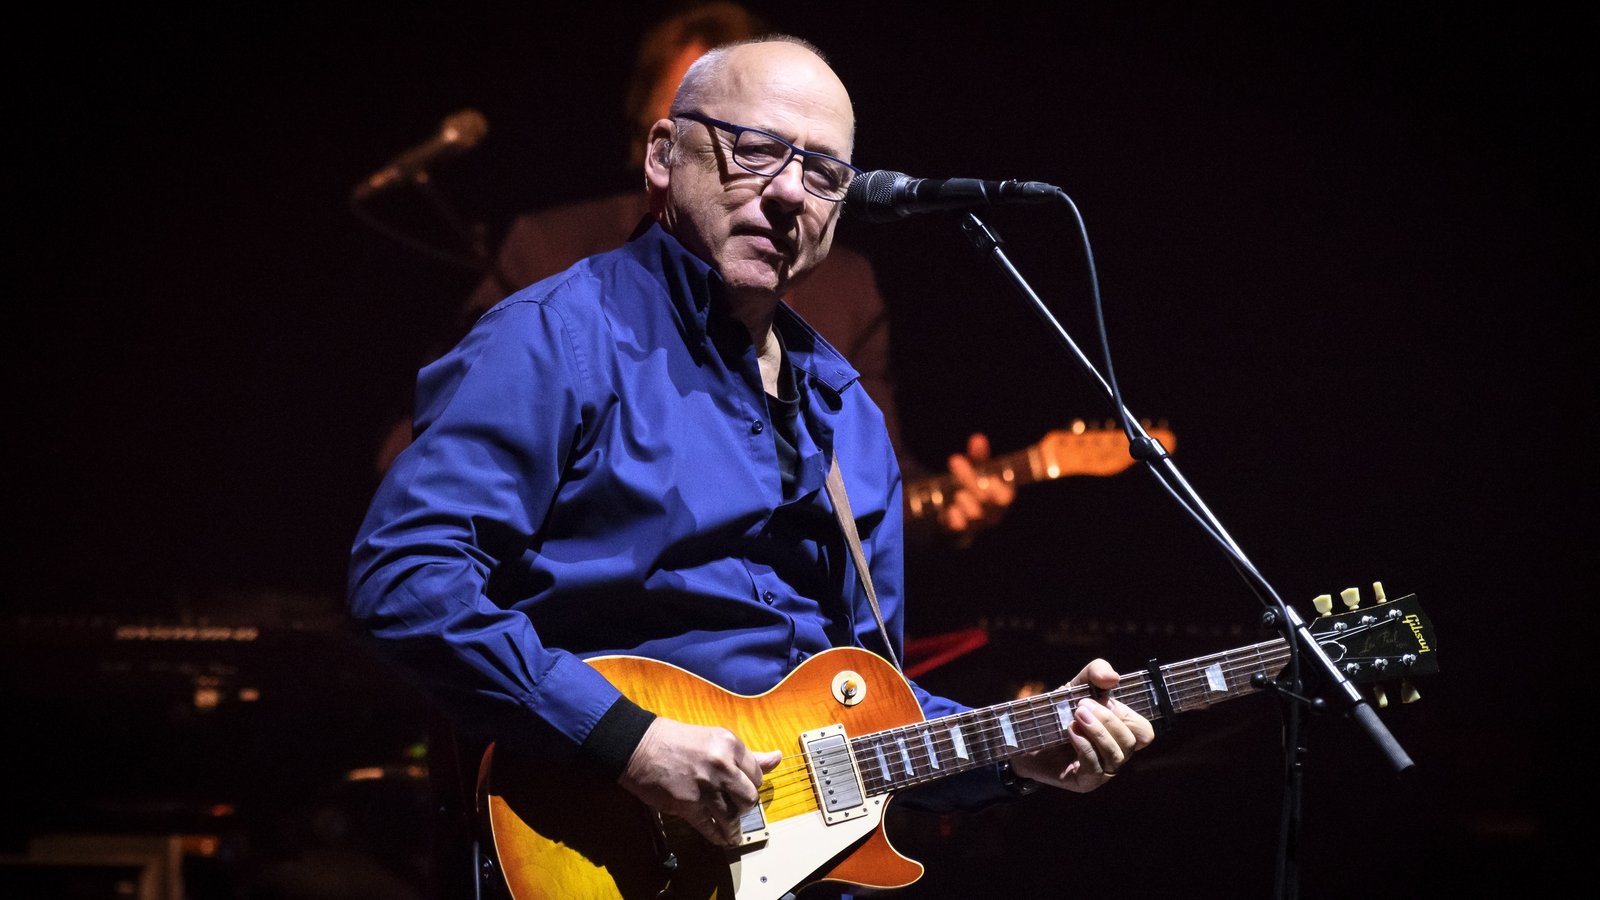 Mark Knopfler's guitar collection raises millions for charity and